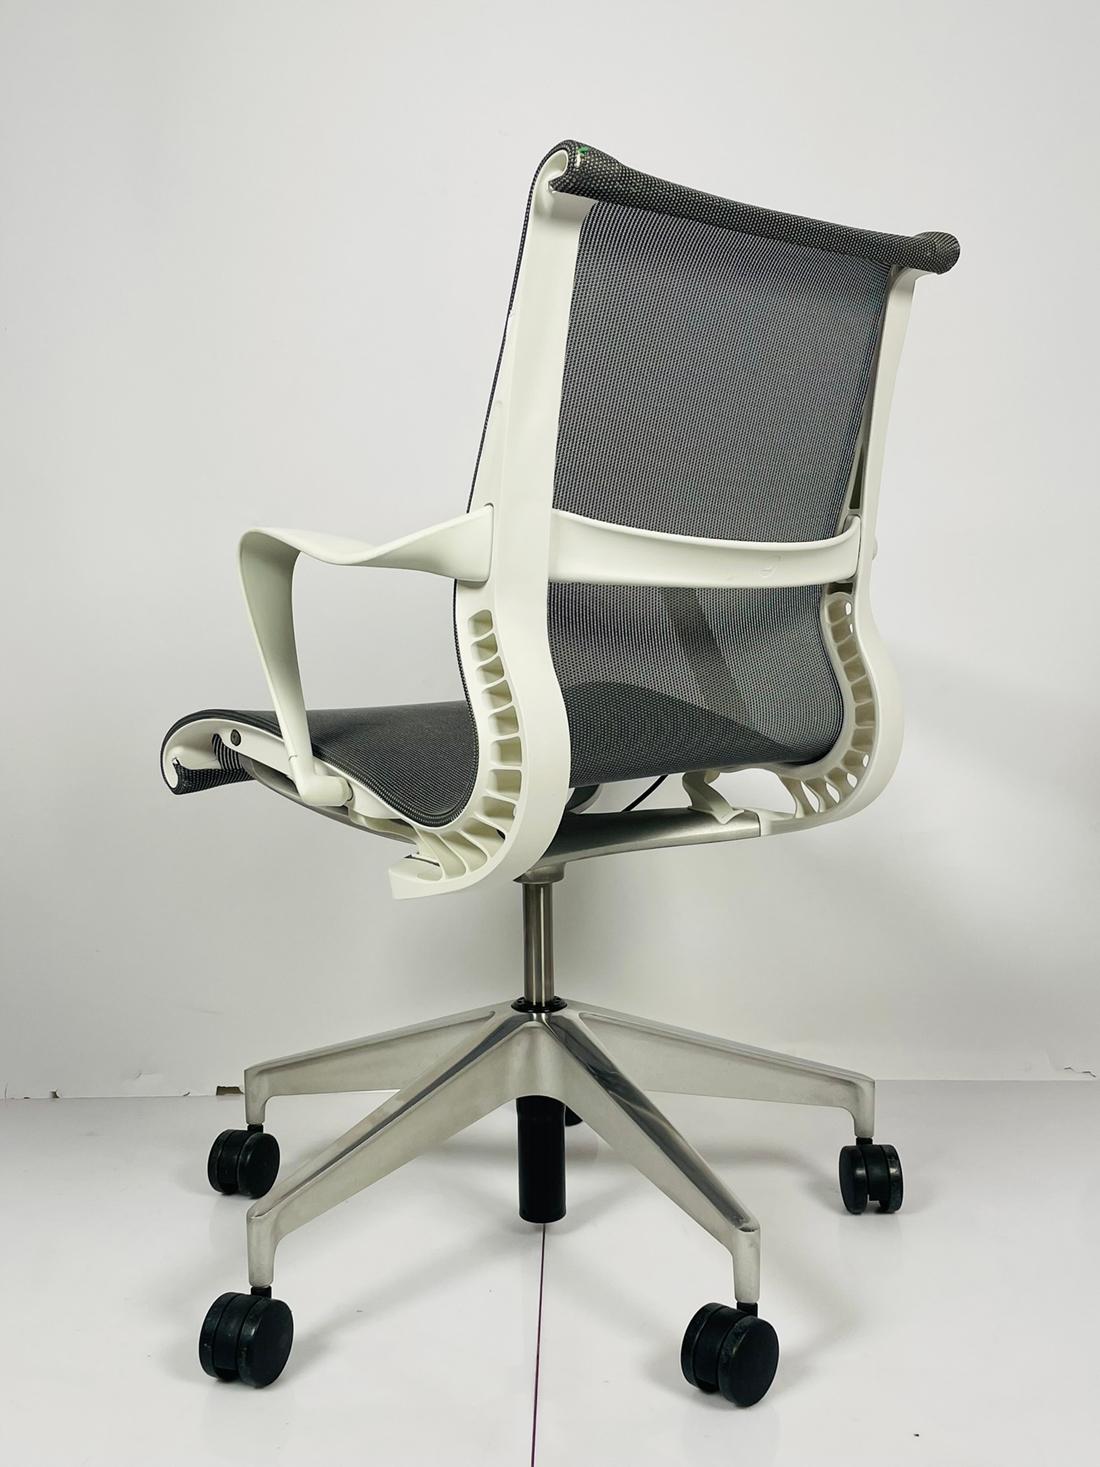 studio chairs for sale